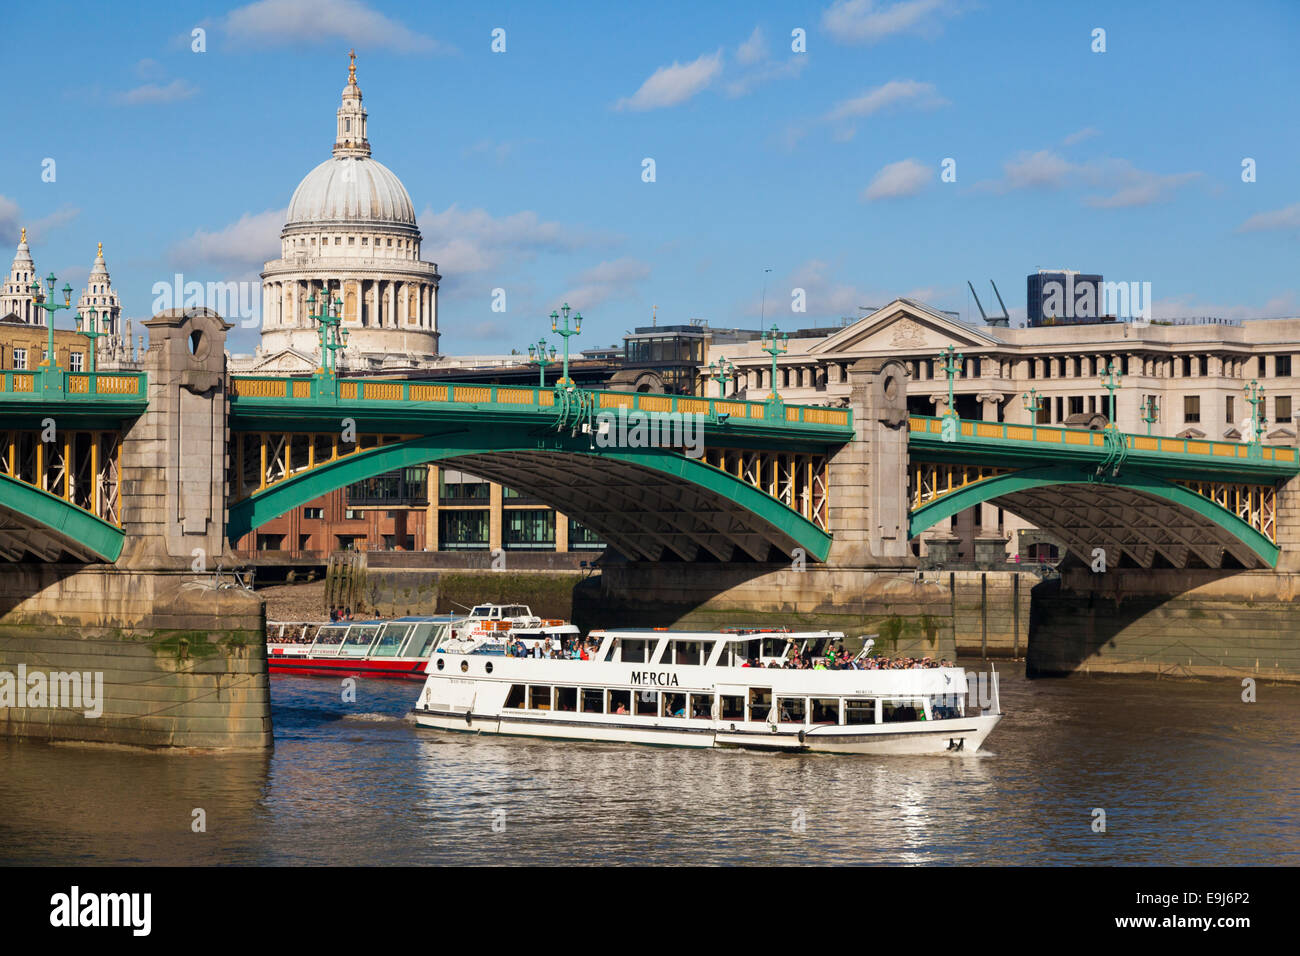 River busses pass under Southwark Bridge on the River Thames with St Paul's Cathedral in background, London, UK Stock Photo